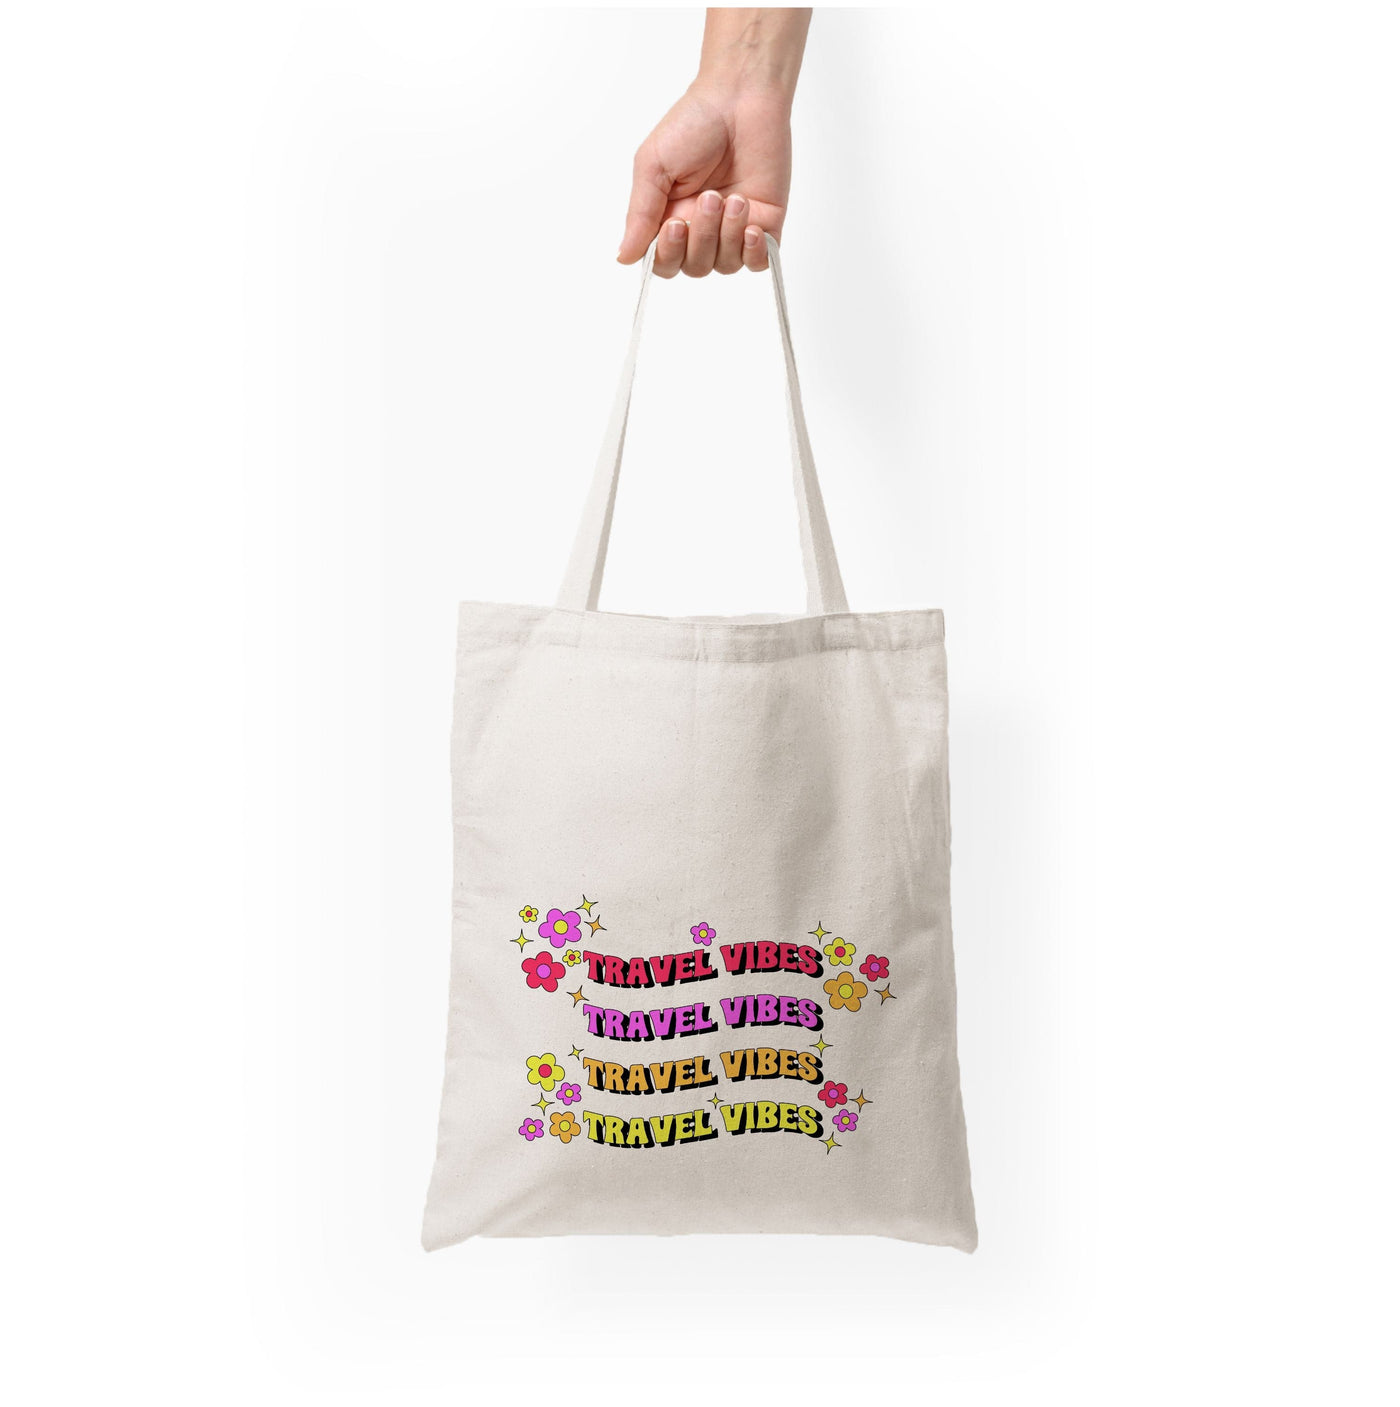 Travel Vibes - Travel Tote Bag